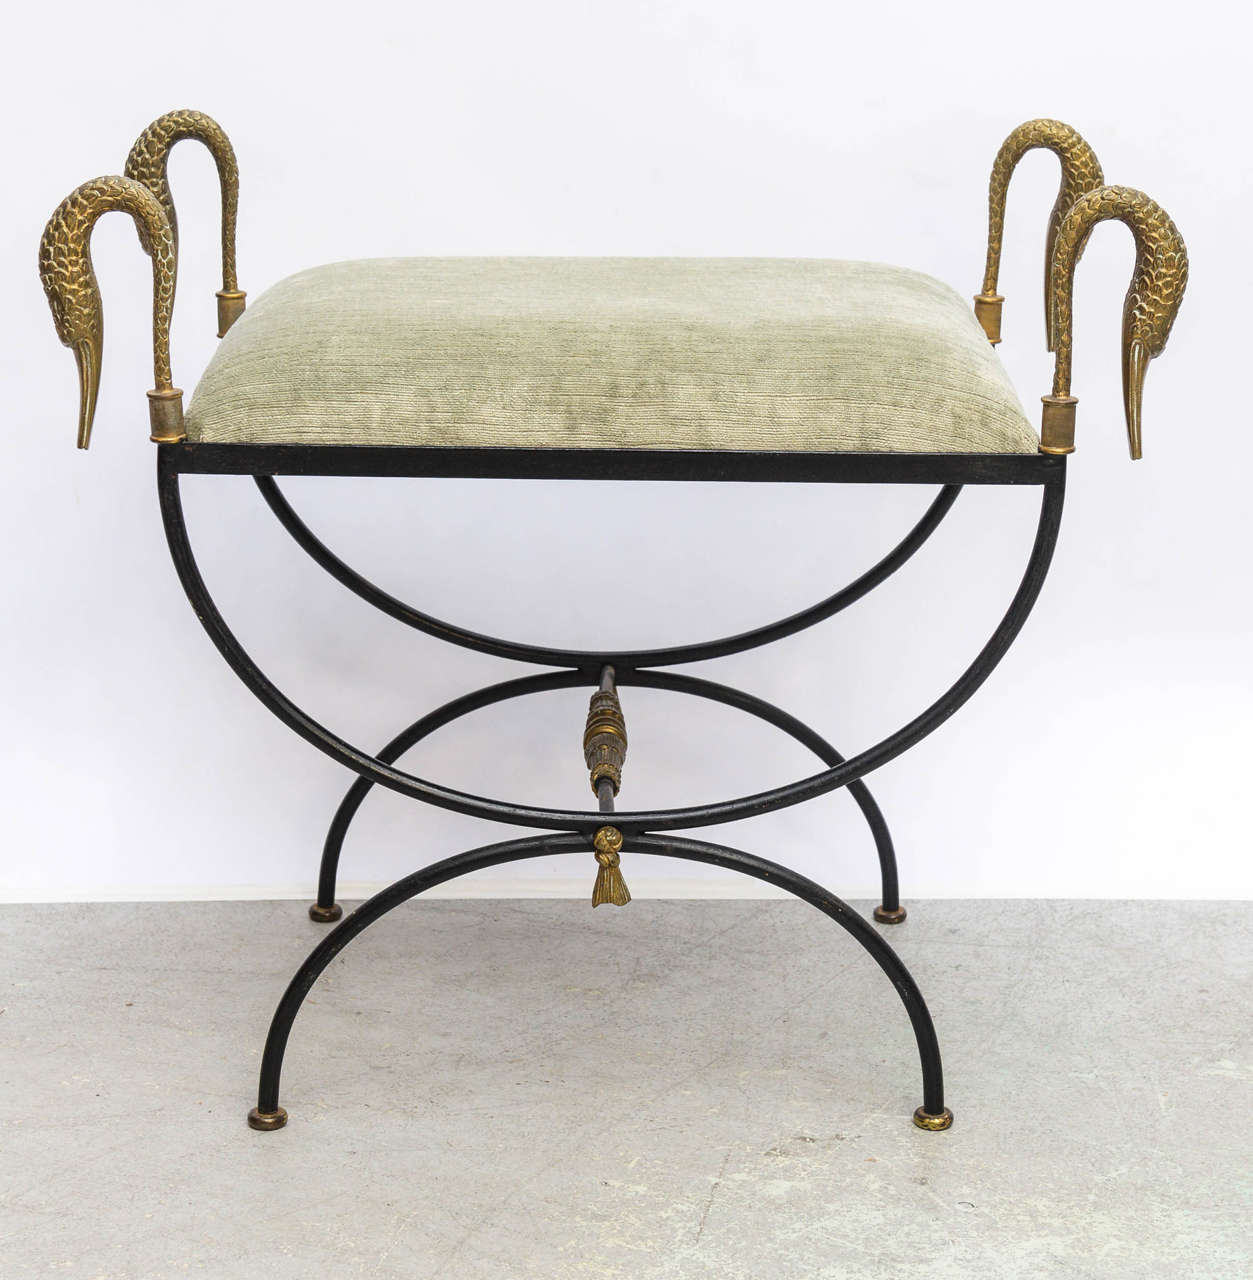 French Pair of Neoclassical Iron and Bronze Swan Benches